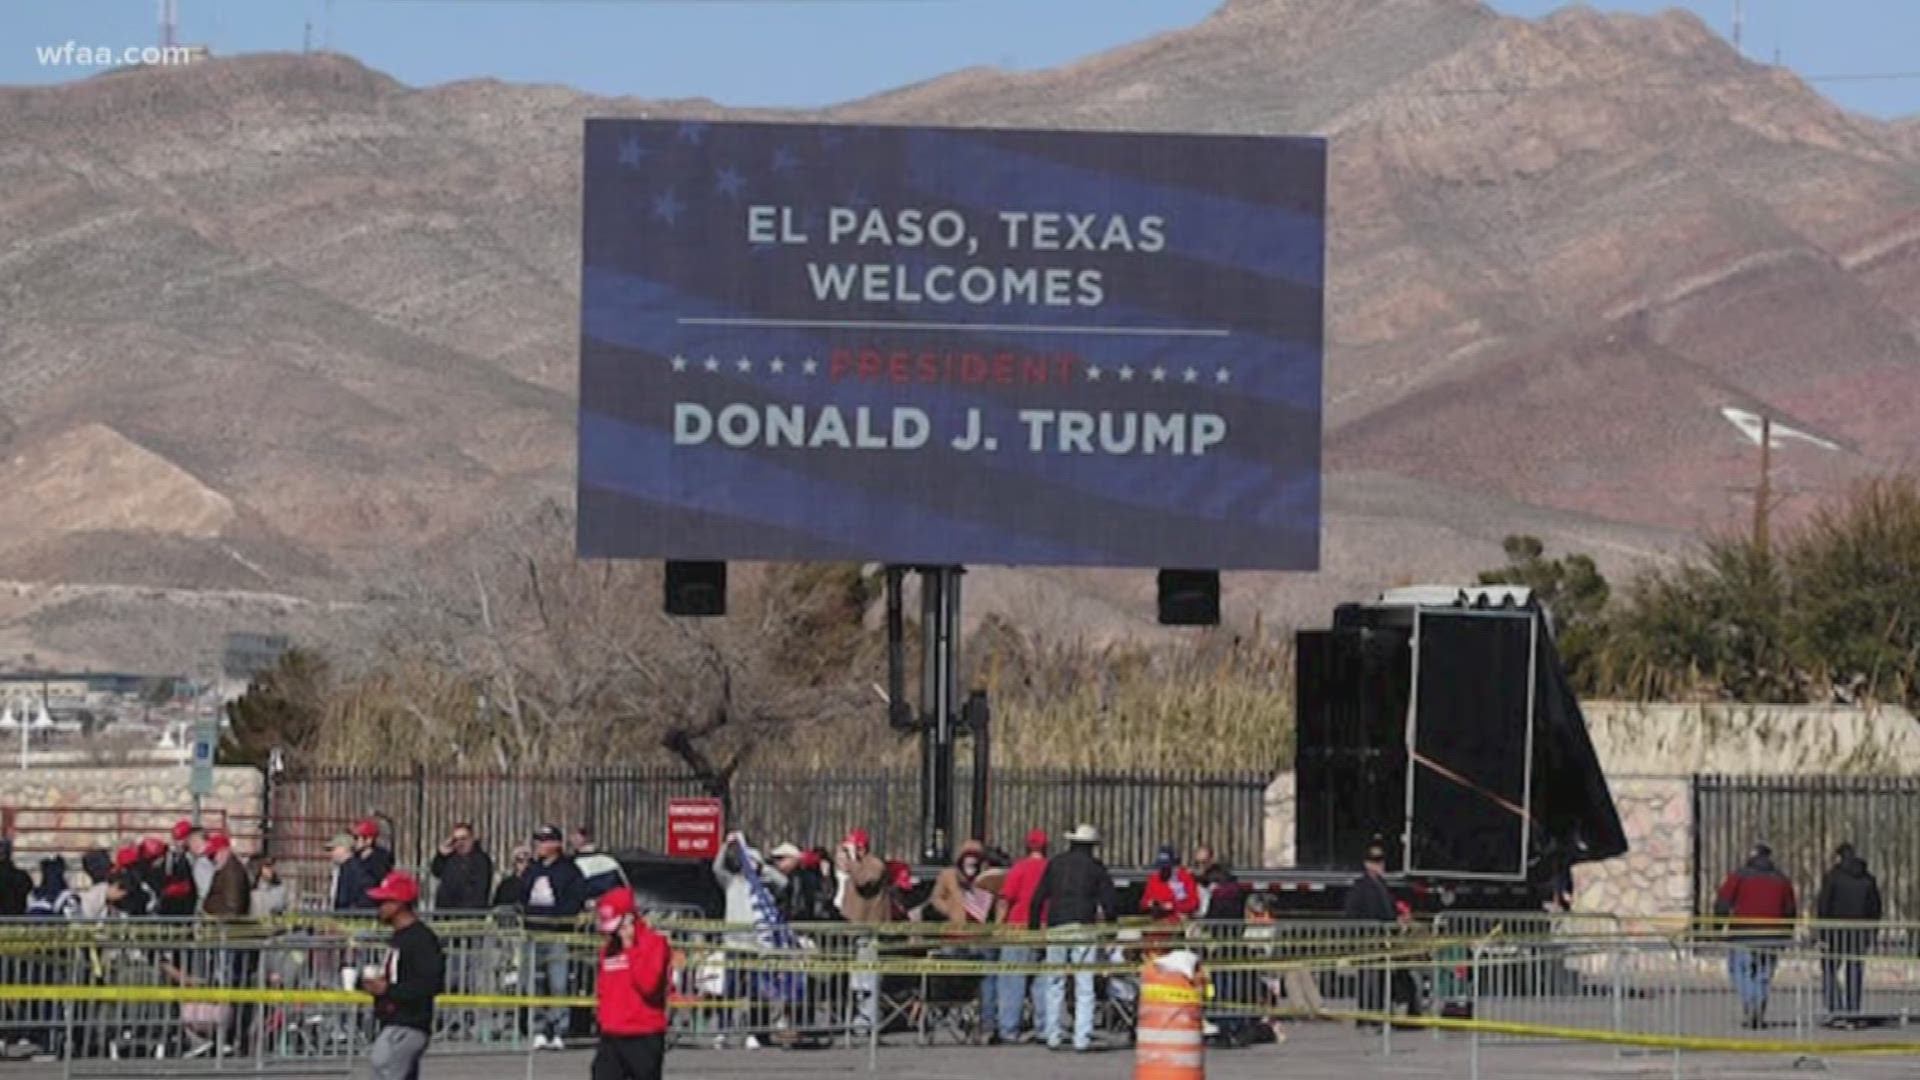 Trump is expected to continue arguing for funding of a border wall at his rally in El Paso on Monday night.